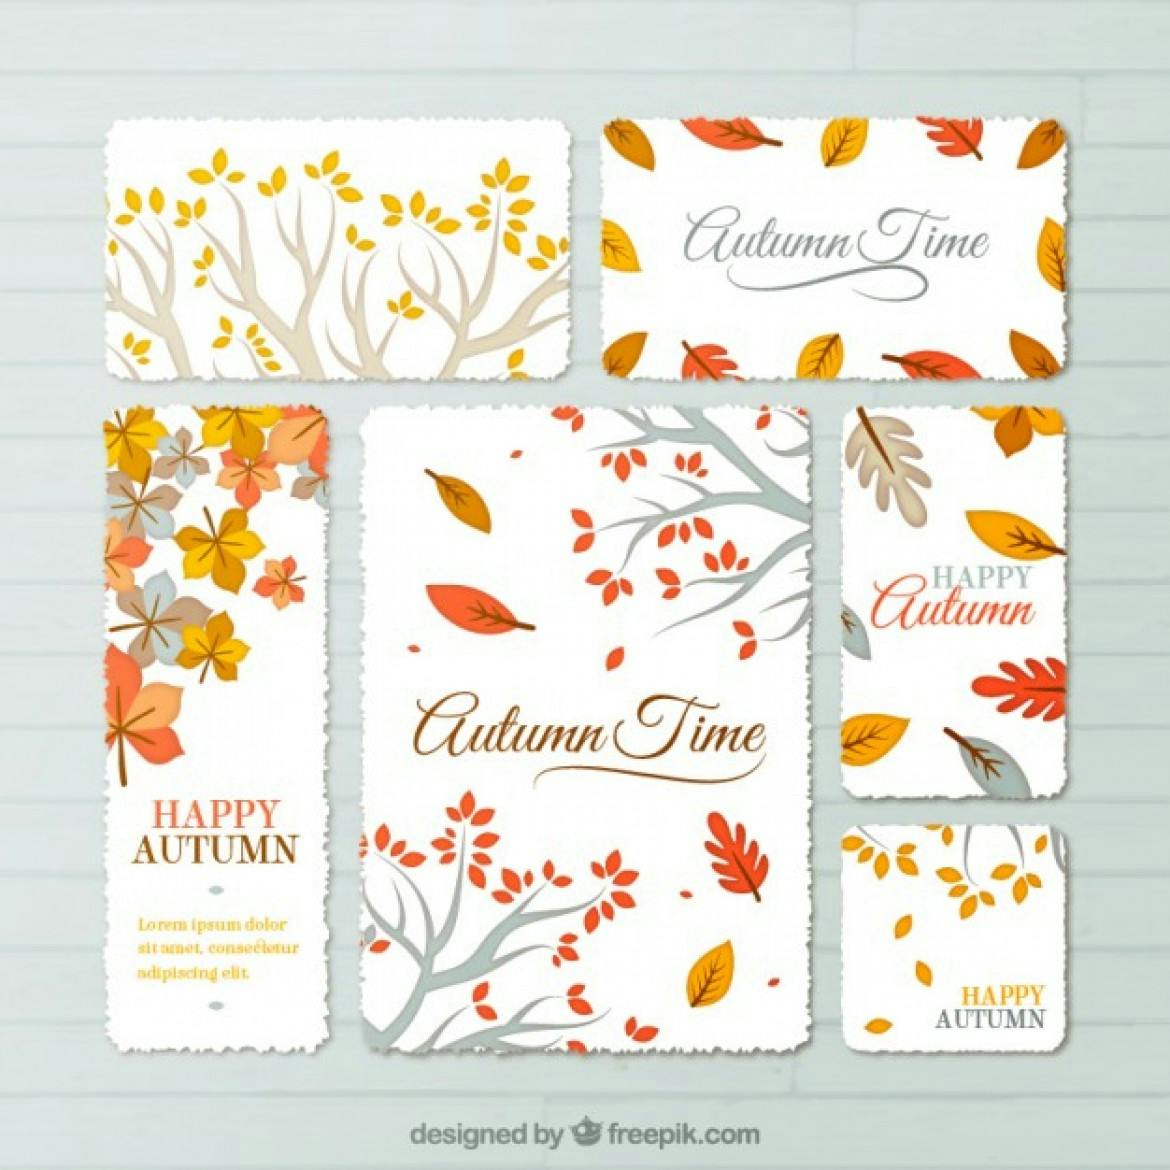 wpid-autumn-time-stationery_23-2147520977-1170x1170